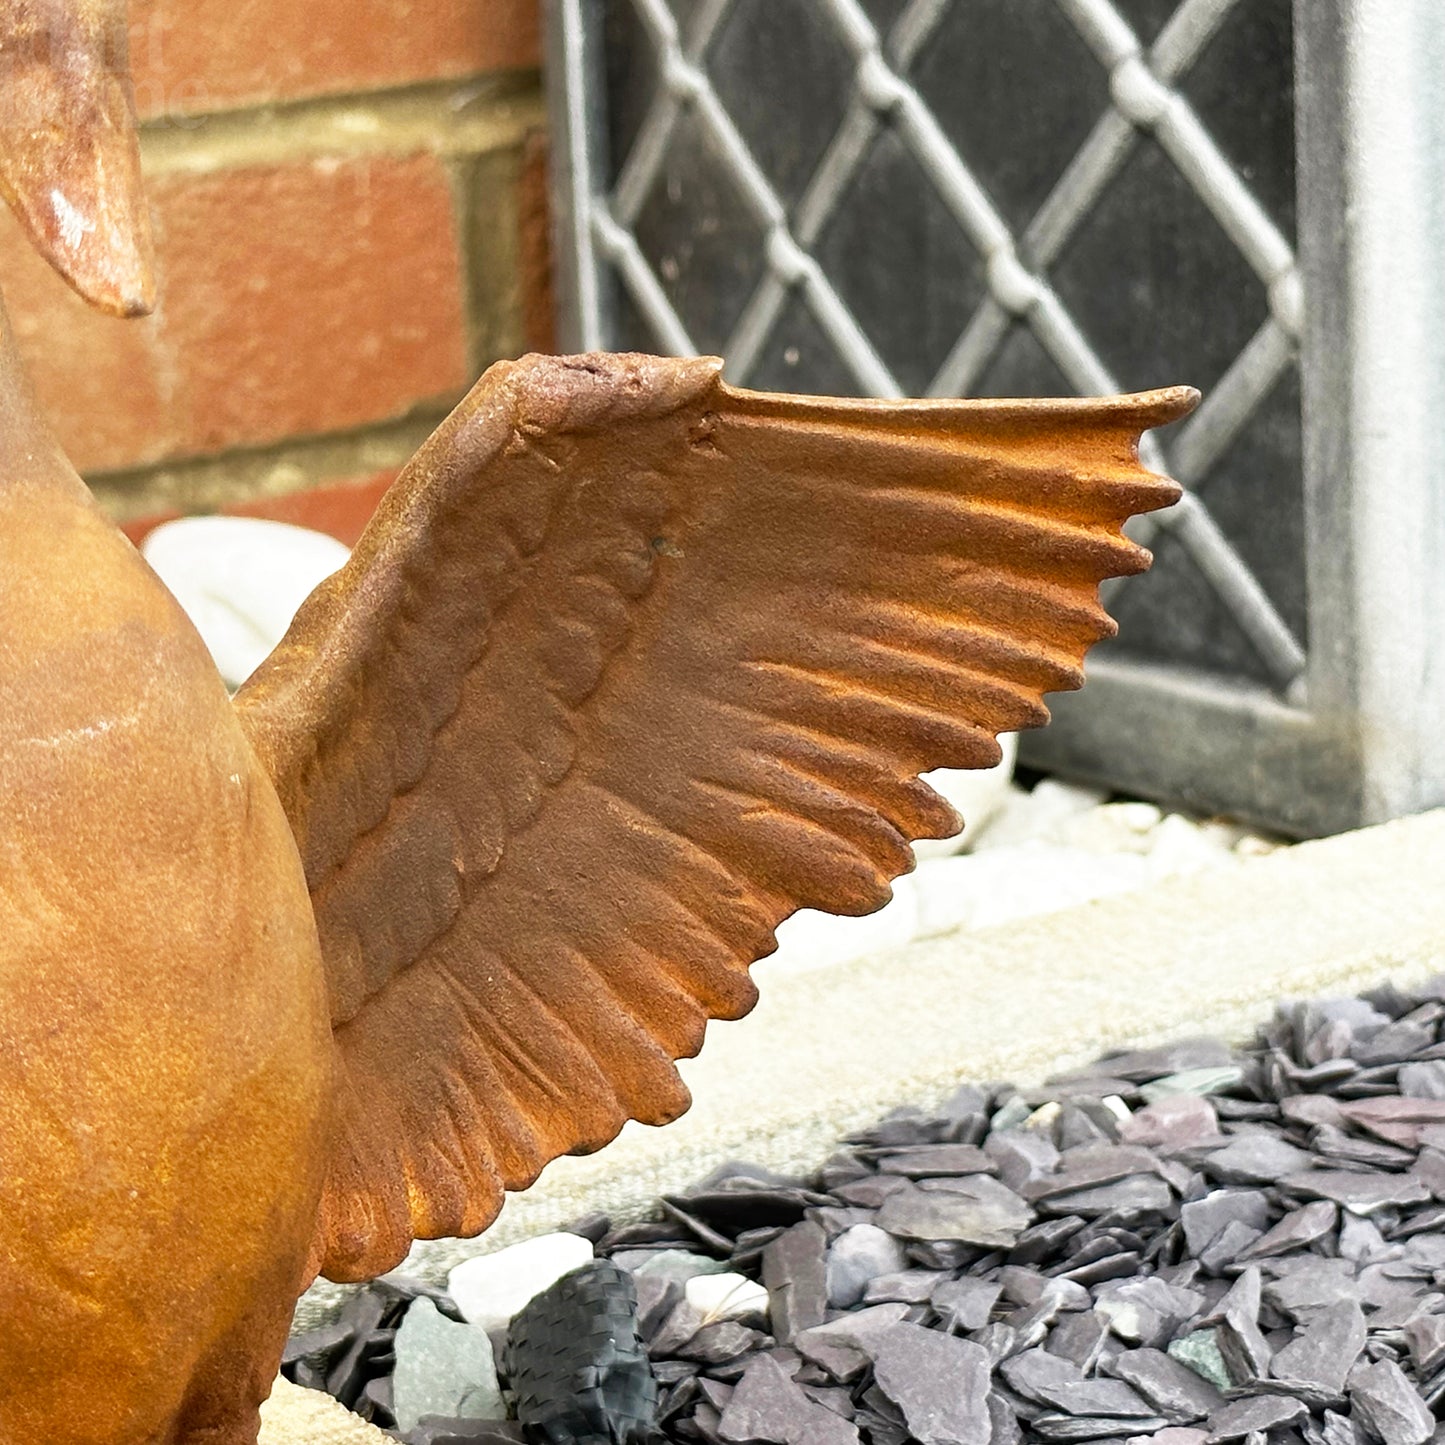 Rusty Cast Iron Crowned Swan Sculpture